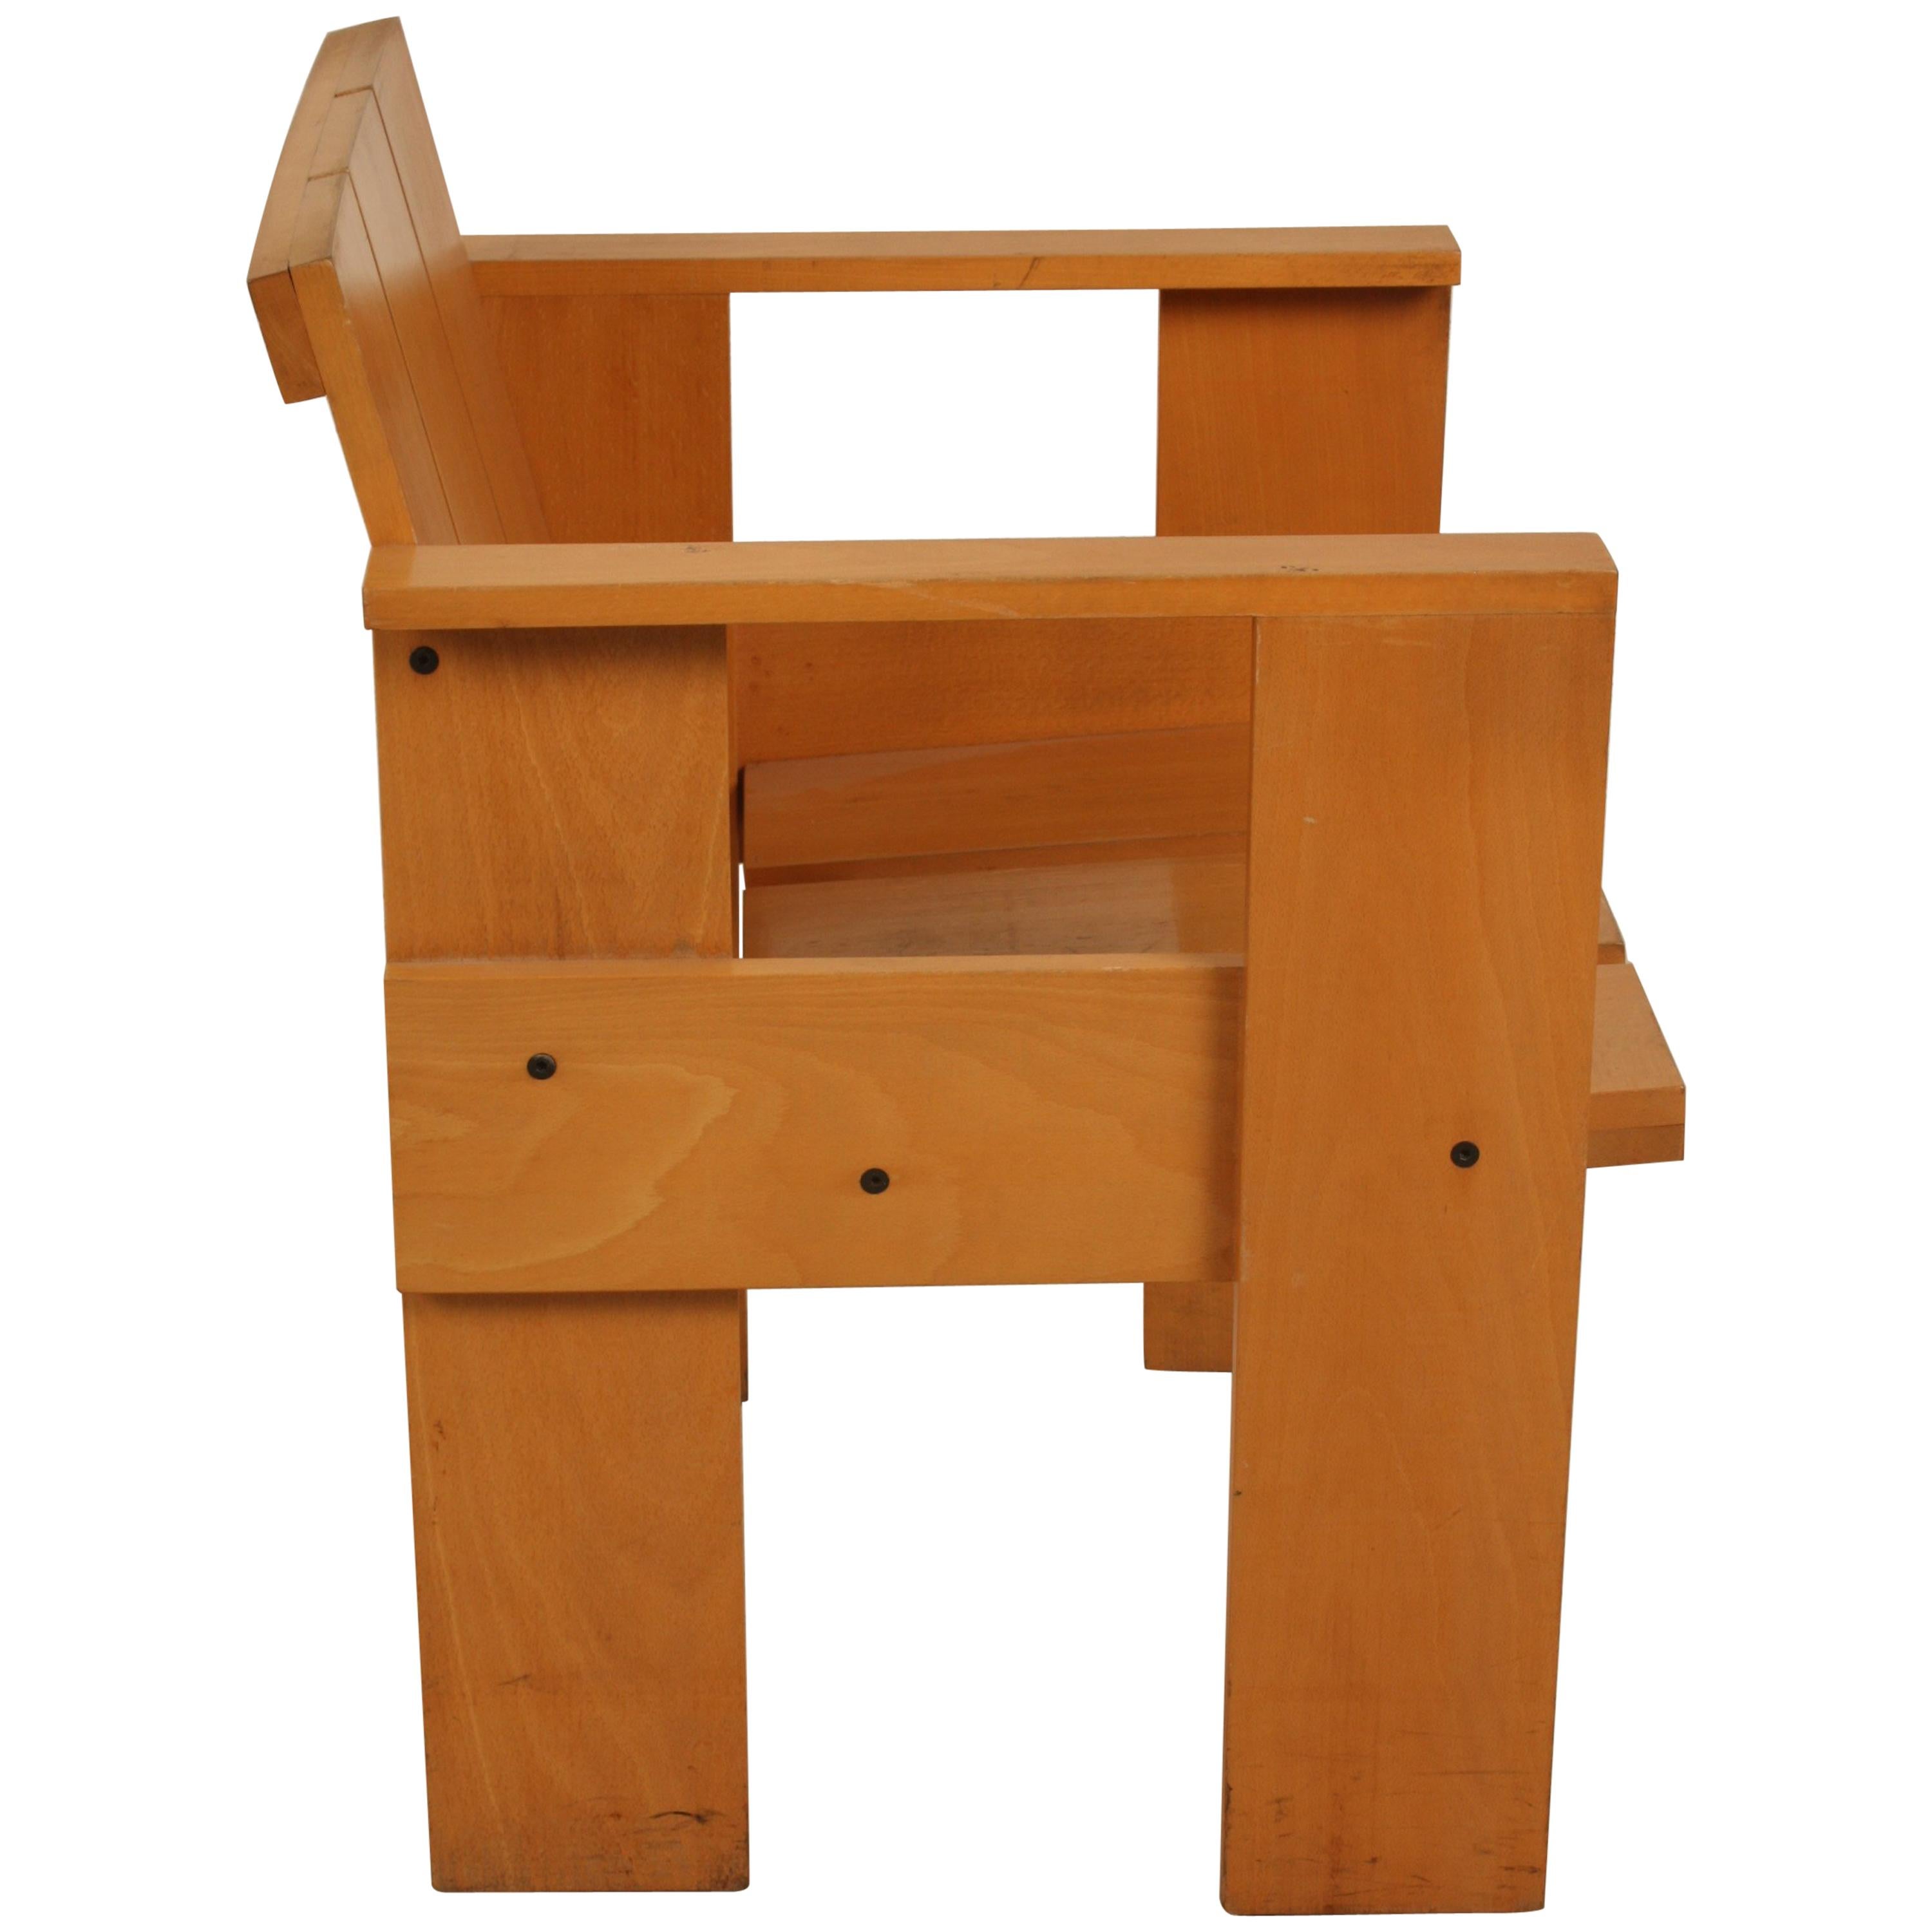 Dutch Design Gerrit Rietveld Crate Chair Numbered For Sale